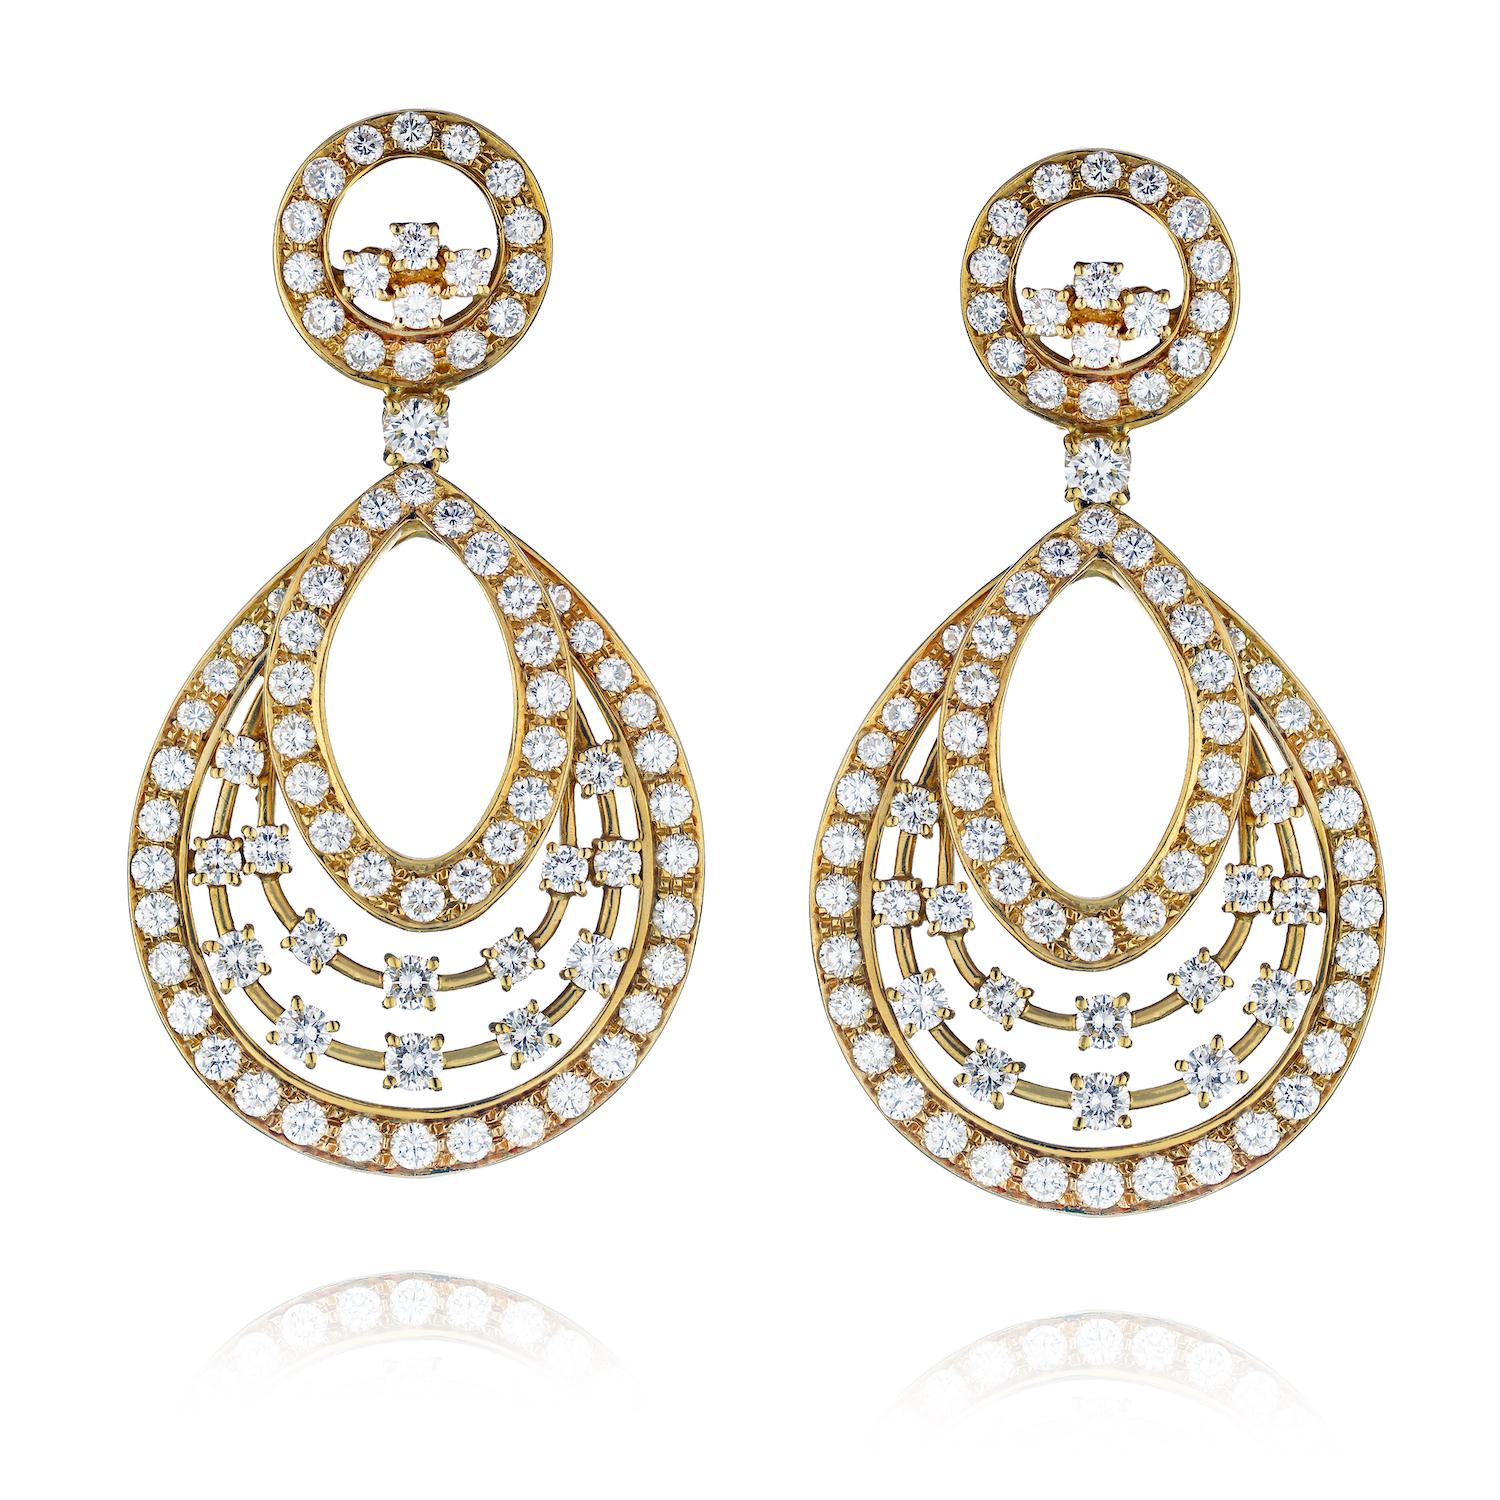 13 Carat Round Cut Diamond Dangling Earrings. 

Talk about a wow factor! These magnificent snowflake-style diamond dangling earrings by Oscar Heyman are certainly a show stopper!

Mounted in 18k yellow gold with 13 carats of diamonds these earrings